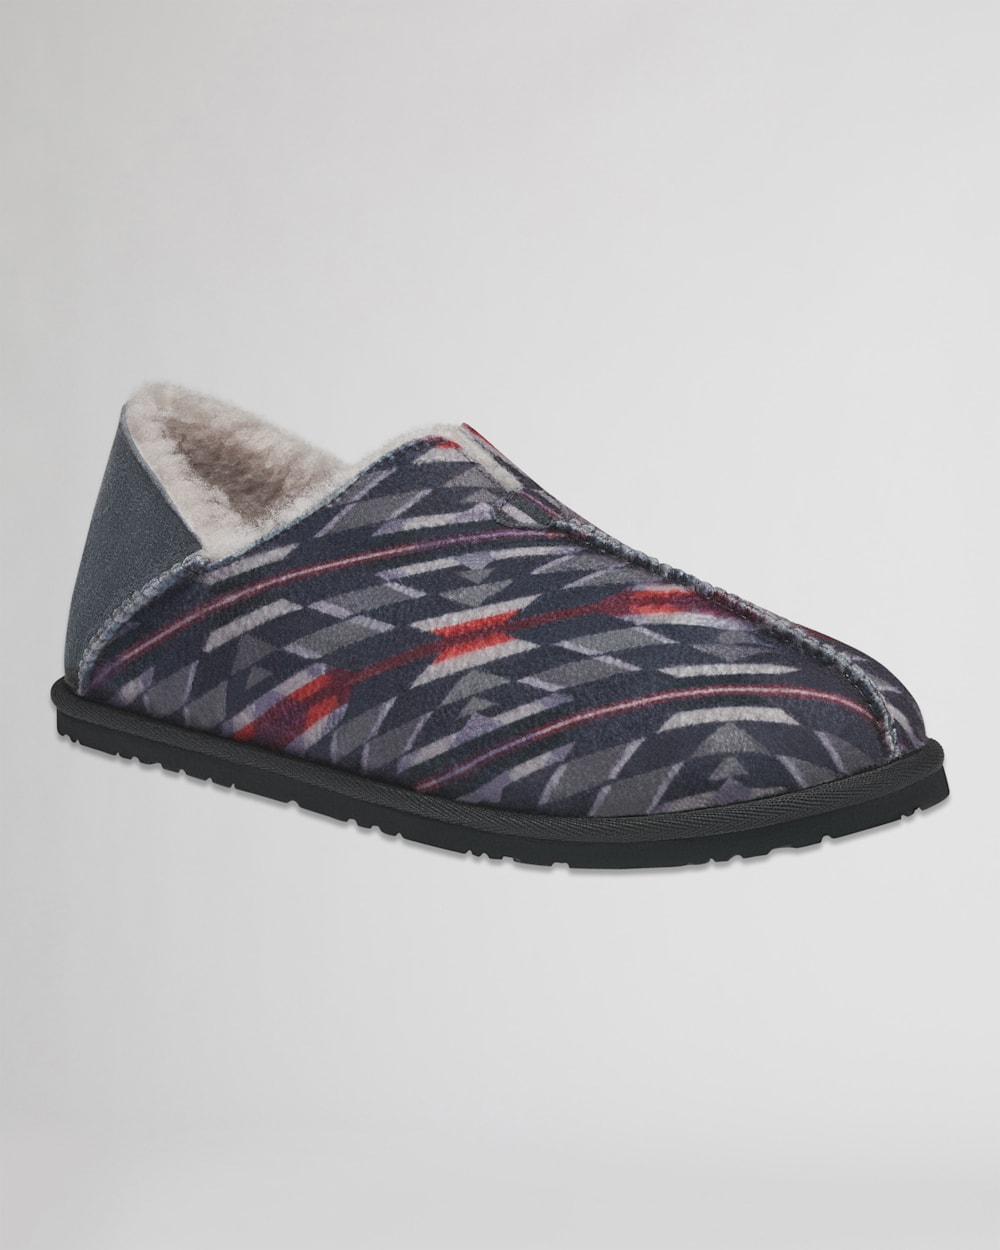 ALTERNATE VIEW OF MEN'S COUCH CRUISER SLIPPERS IN GREY HOLLY image number 2